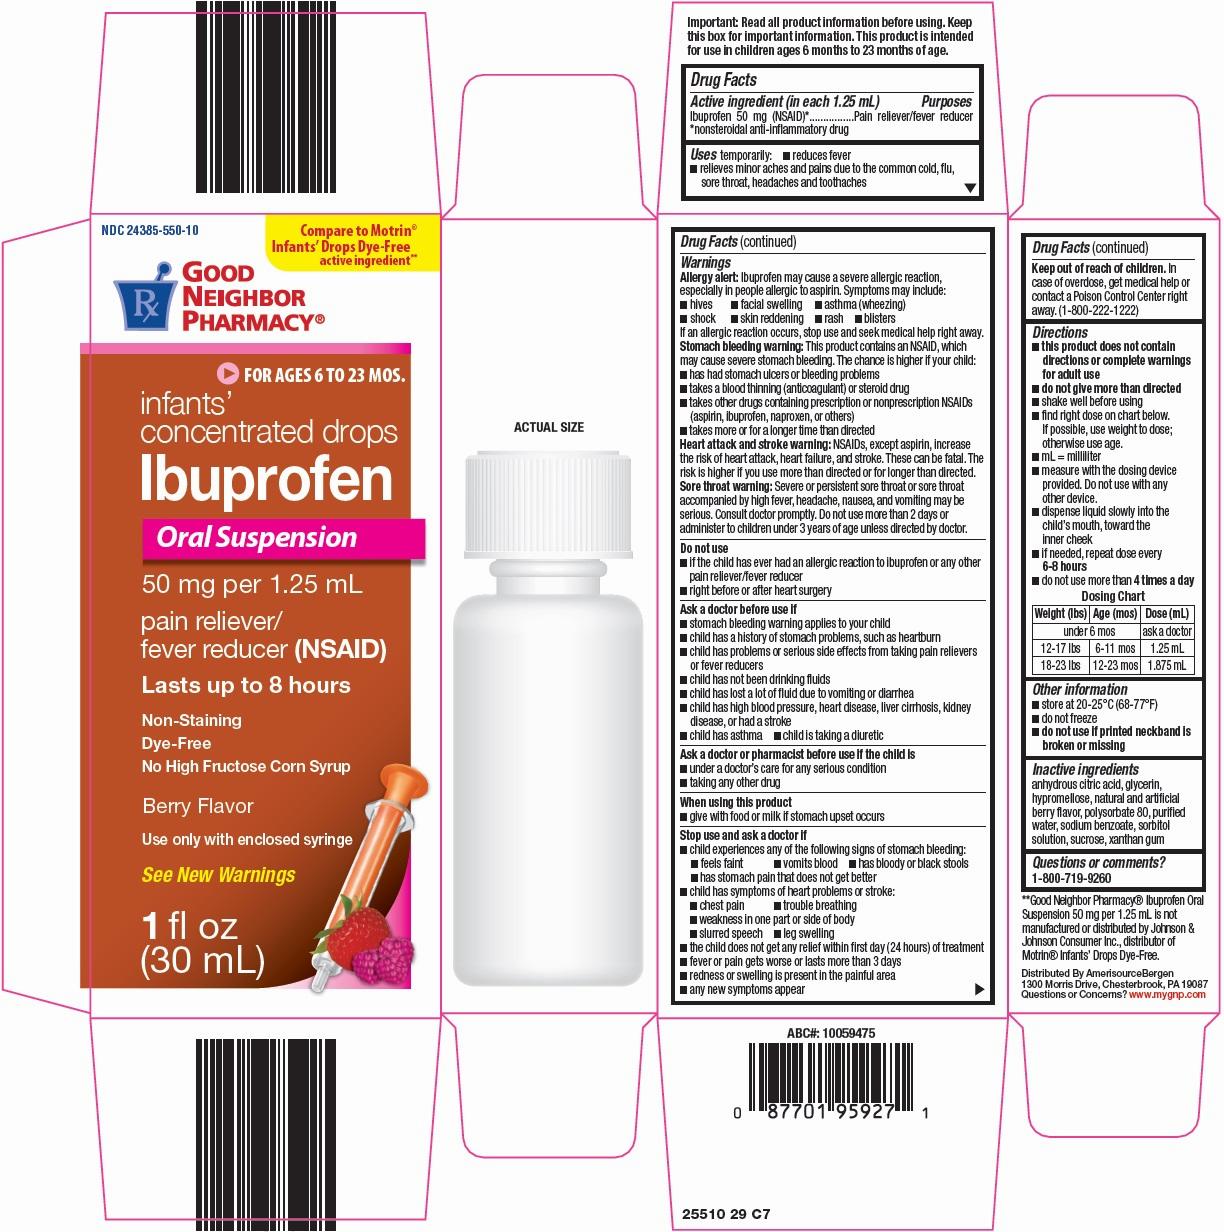 A box of Good Neighbor Pharmacy Infants Concentrated Drops Ibuprofen, a pain reliever and fever reducer for children ages 6 to 23 months.